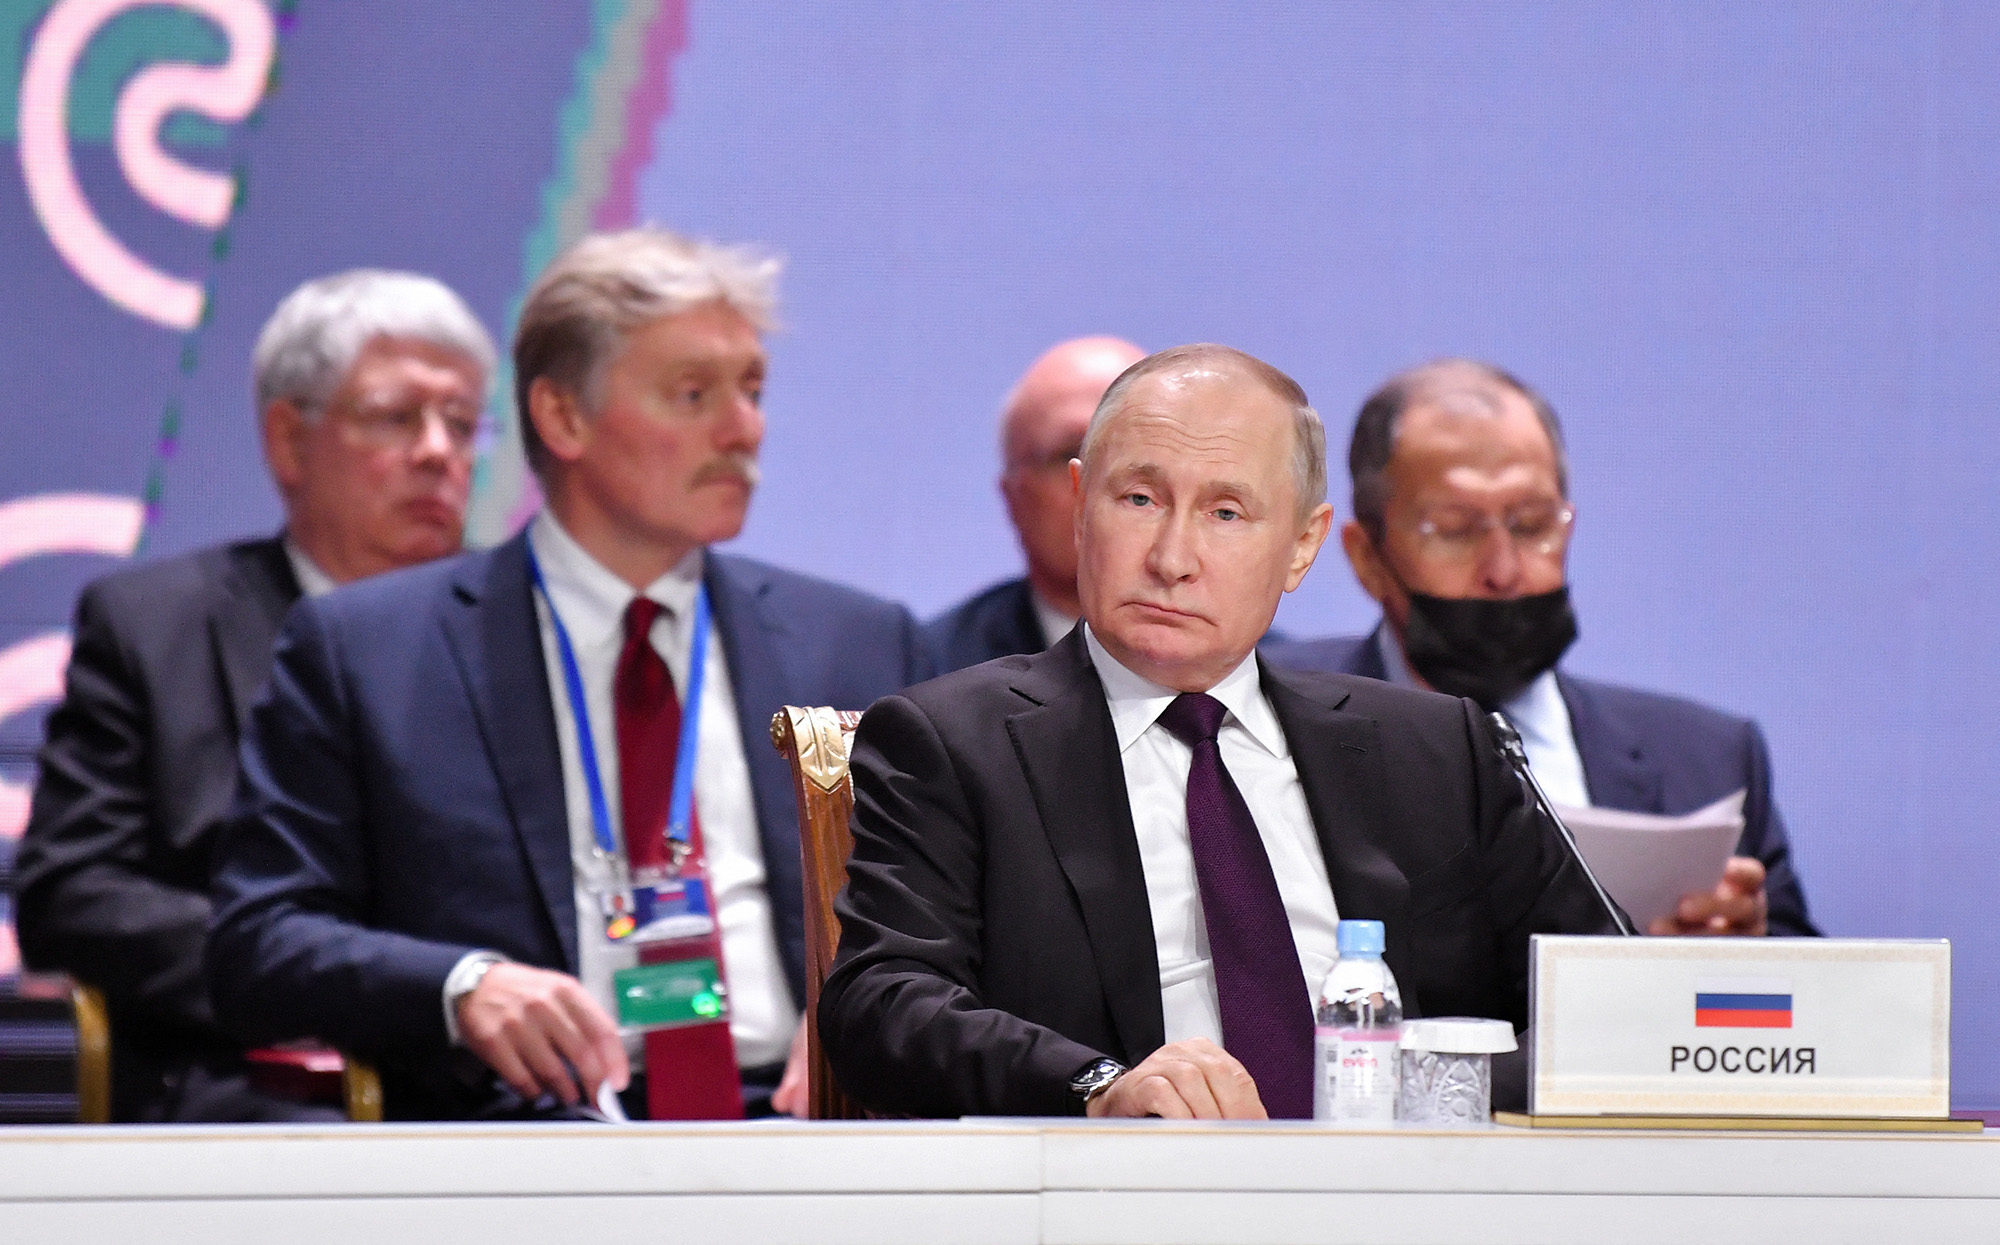 Russian President Vladimir Putin, flanked by Foreign Minister Sergei Lavrov and Kremlin spokesman Dmitry Peskov, attend the summit of leaders of the Commonwealth of Independent States (CIS) in Astana, Kazakhstan, on October 14,